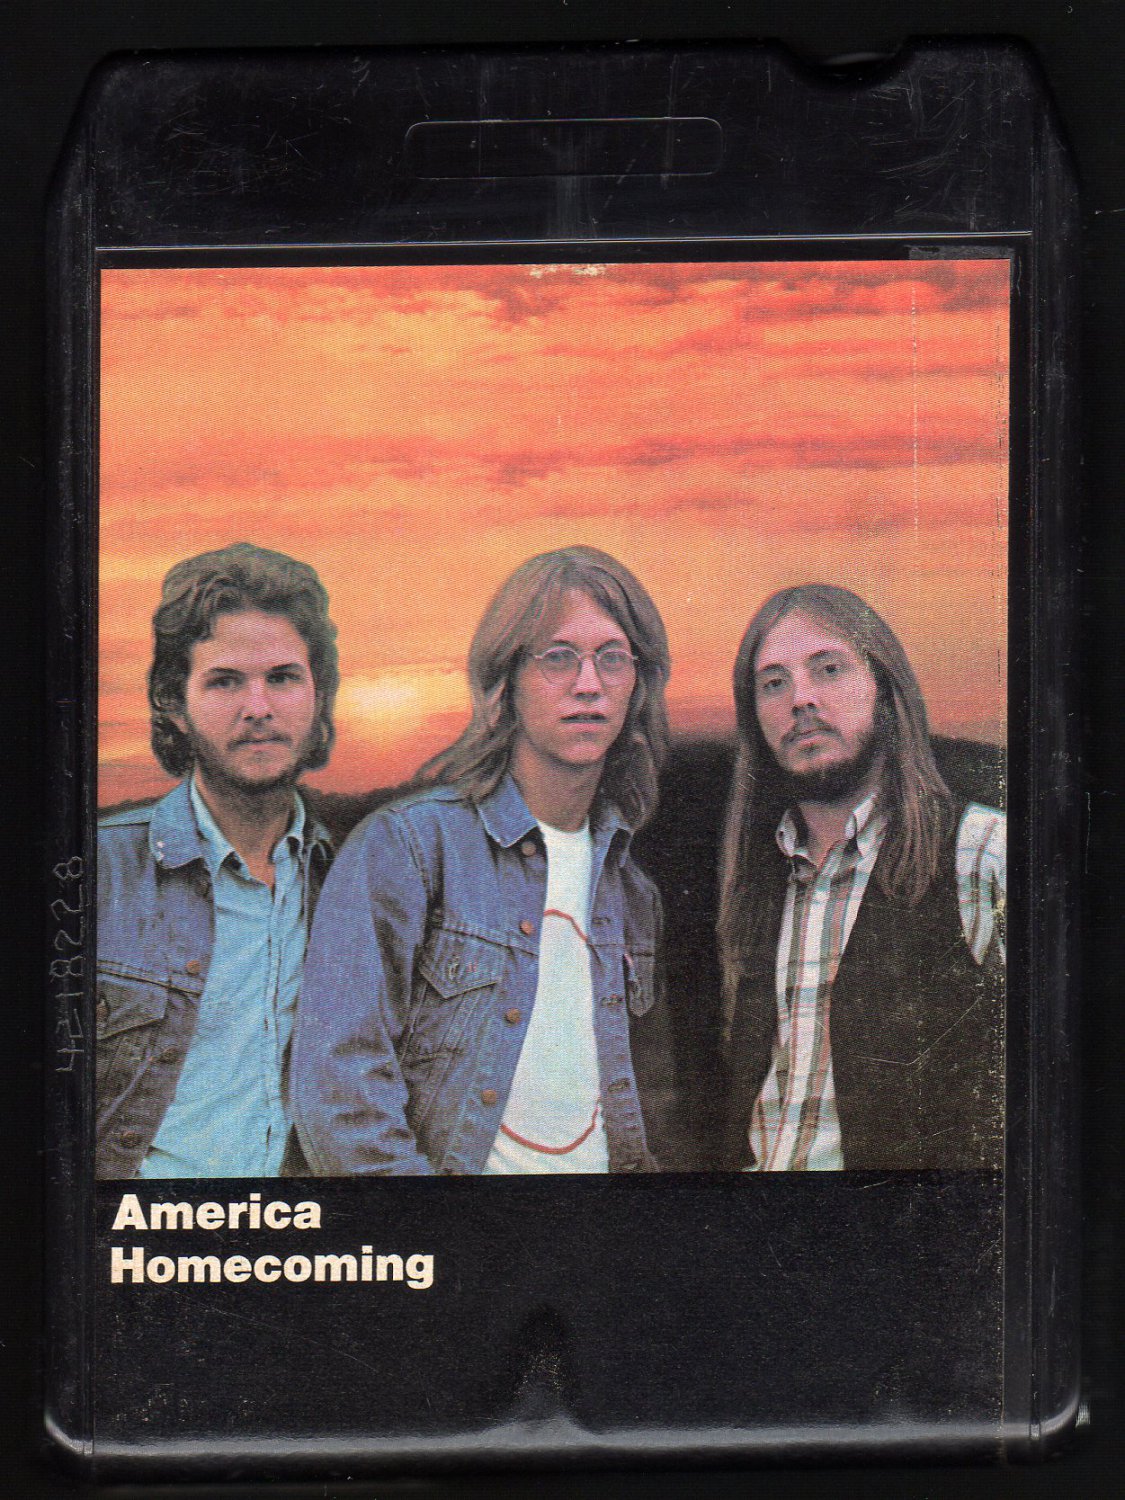 America - Homecoming 1972 AMPEX WB A23 8-TRACK TAPE